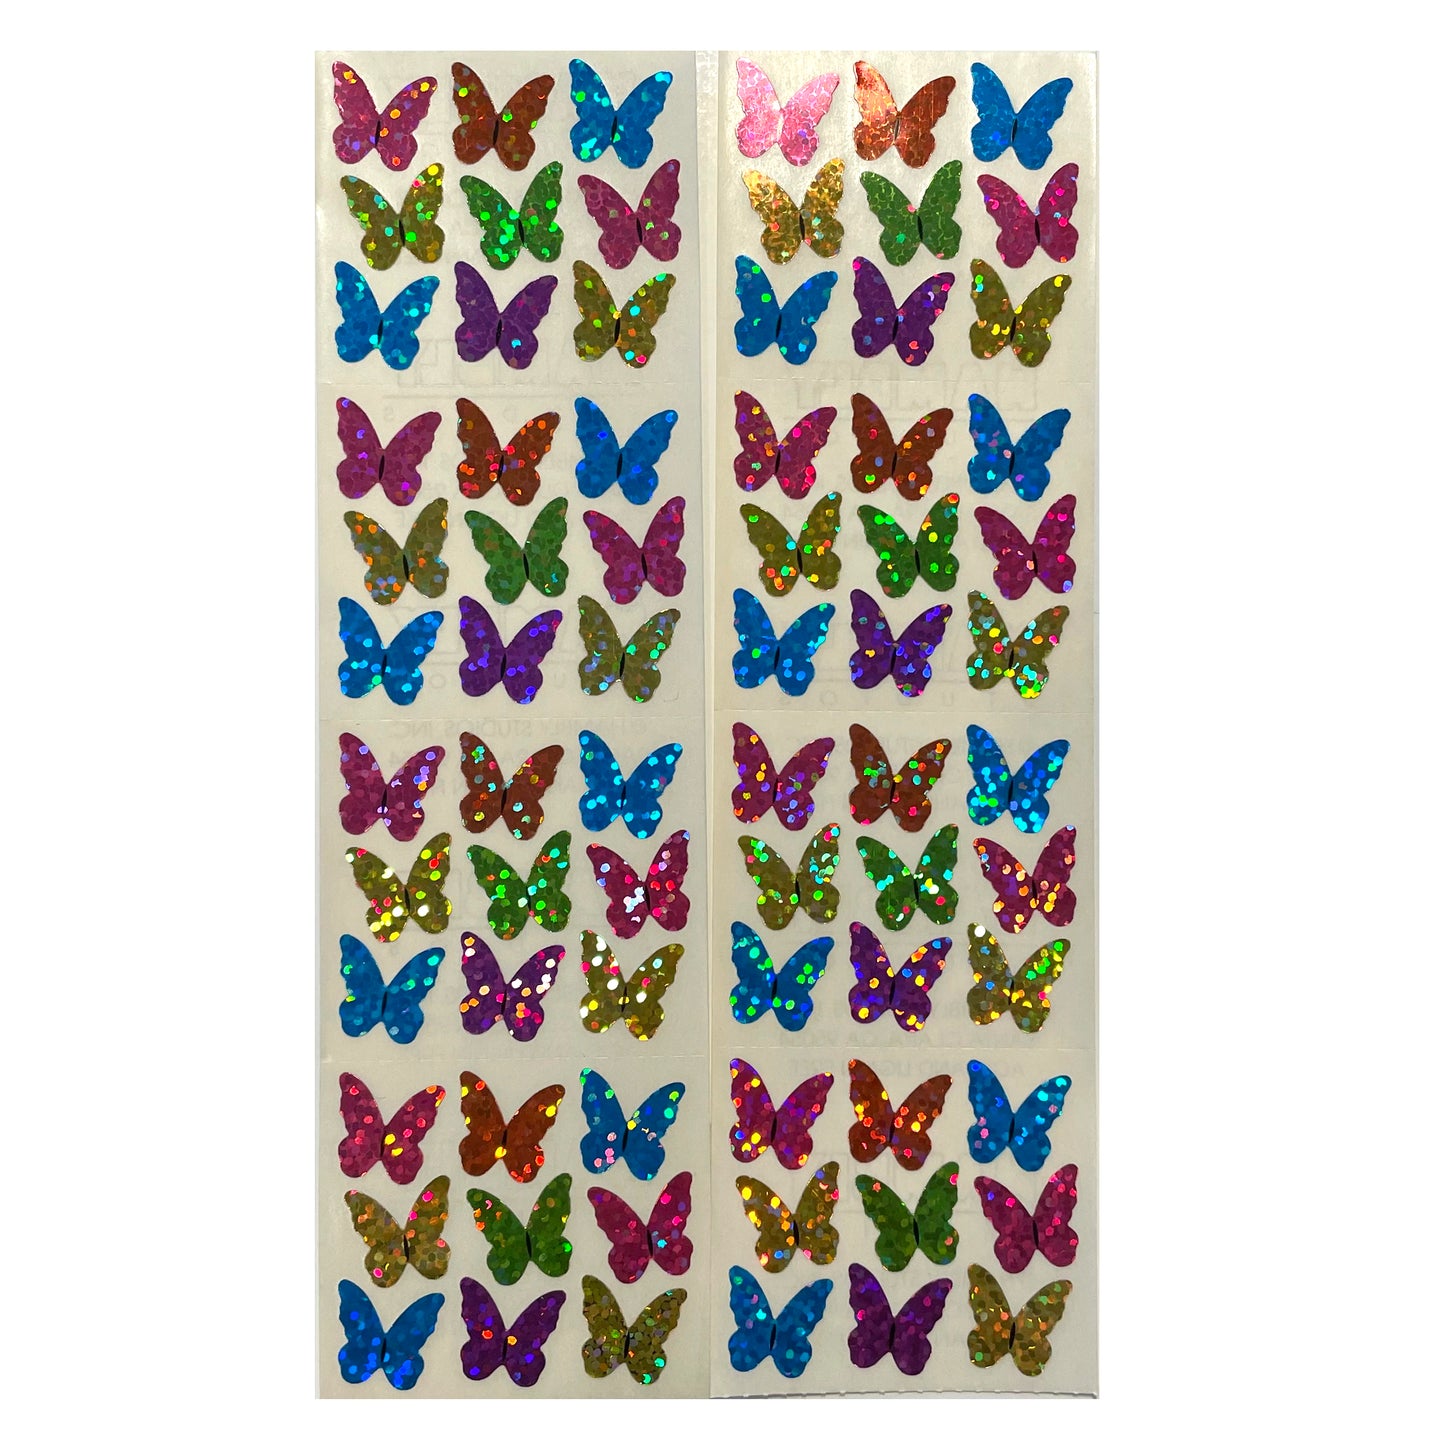 HAMBLY: Micro Bright Butterfly glitter stickers